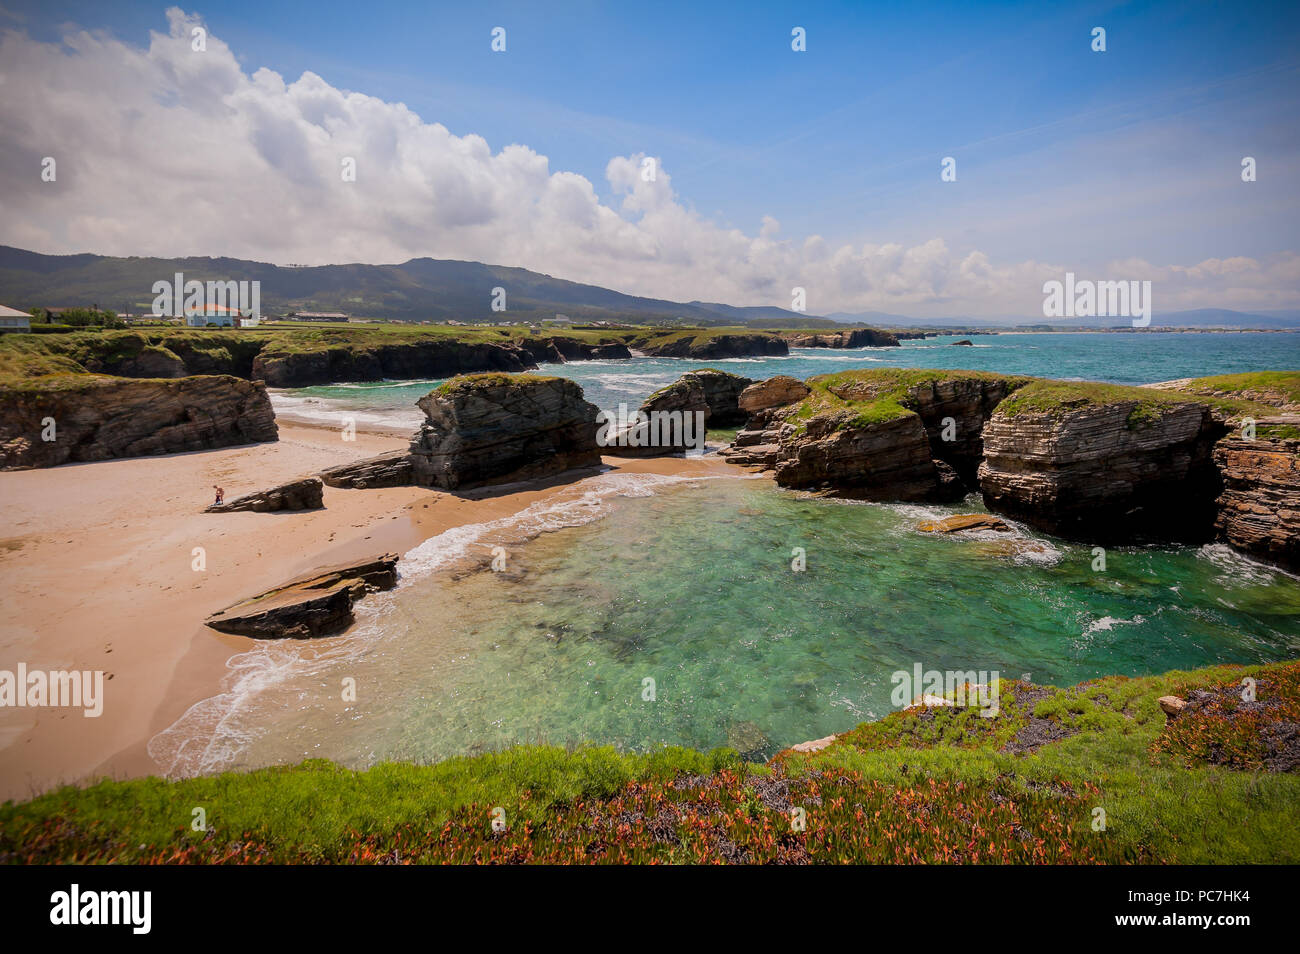 Beauty Atlantic coast with cliff,beach,ocean and sky with clouds. Galicia, Spain. Stock Photo